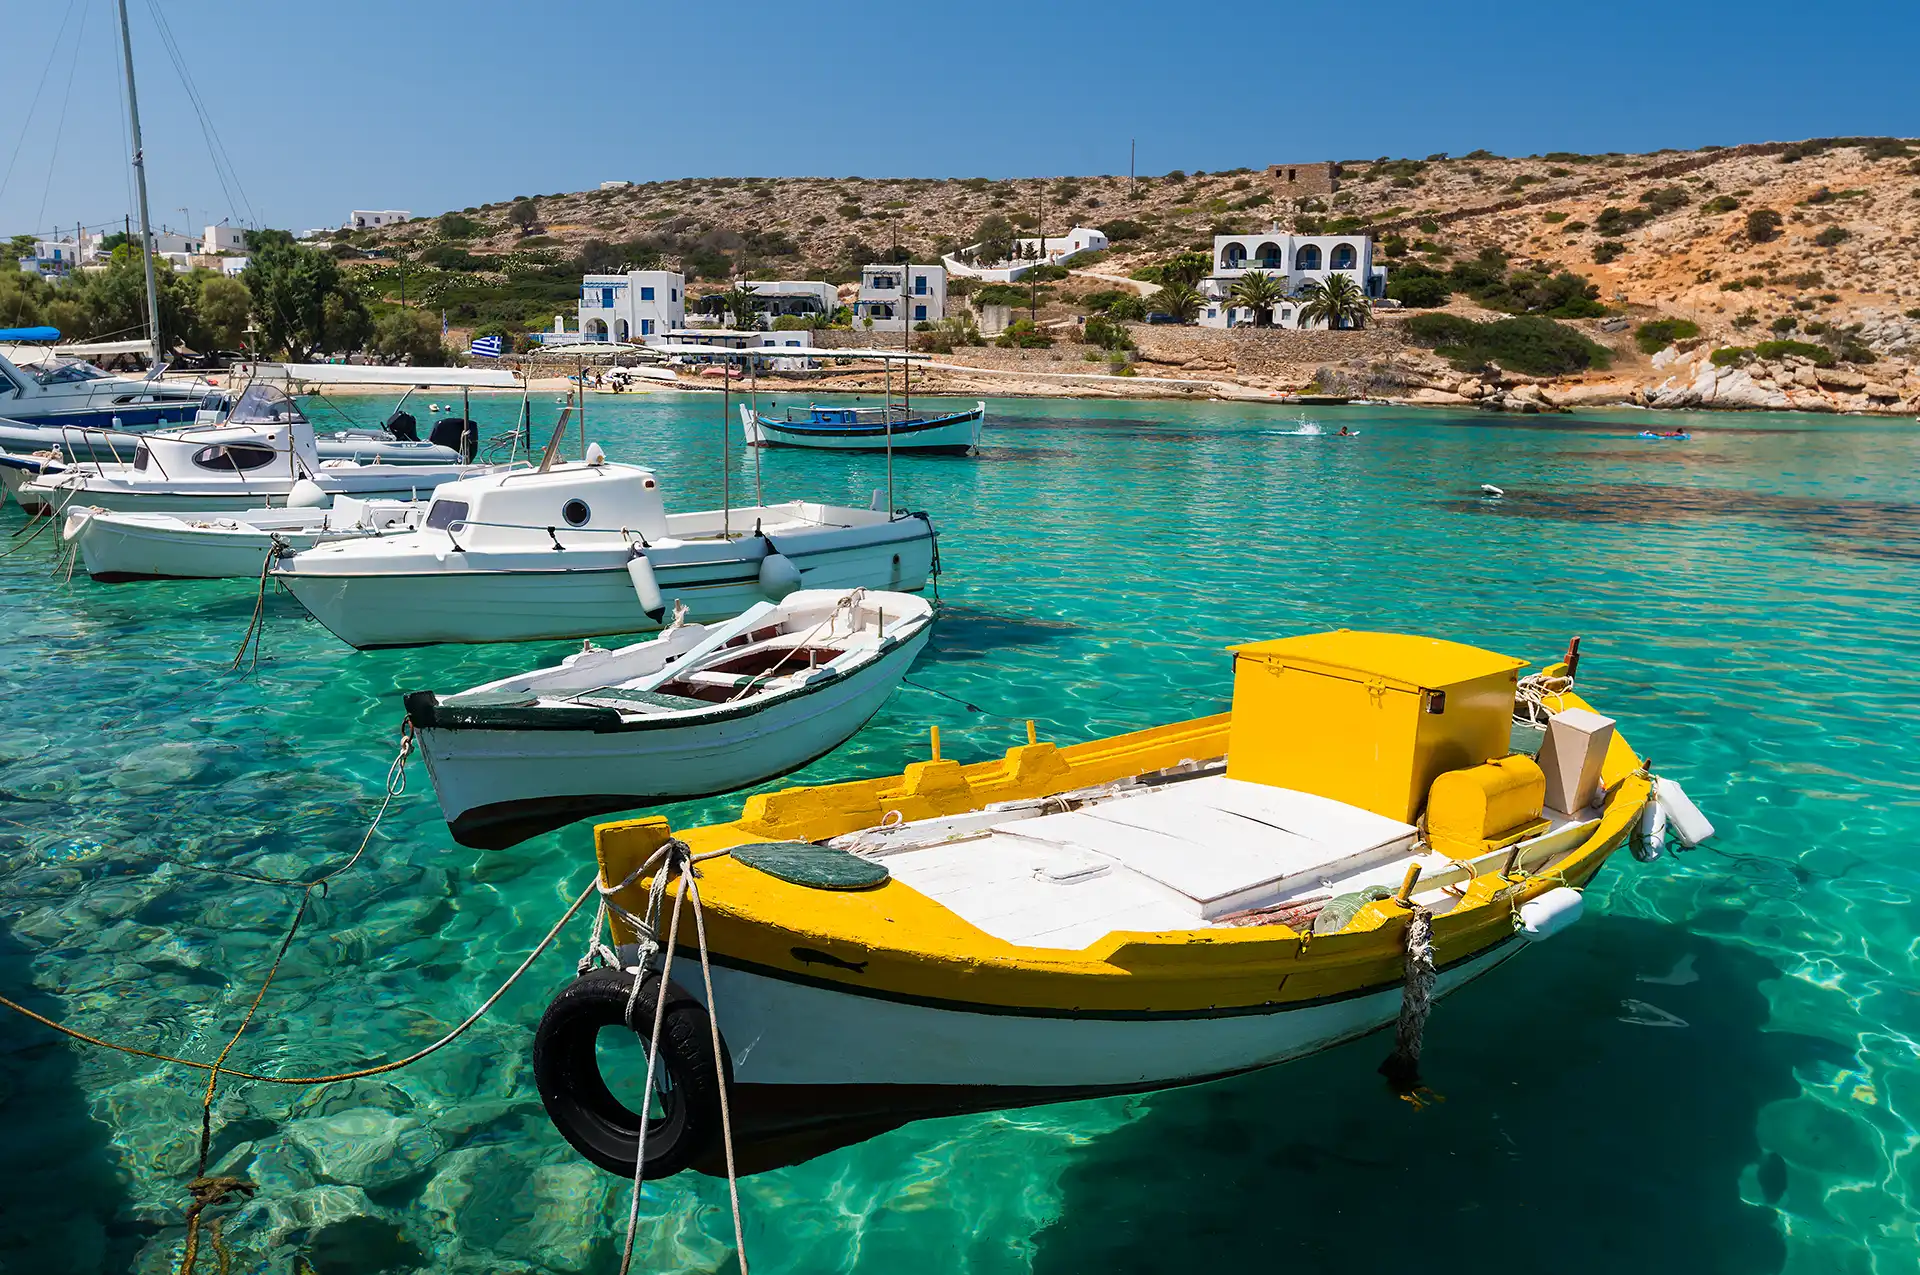 transparent water of the port of the Greek island of Irakleia in the Small Cyclades